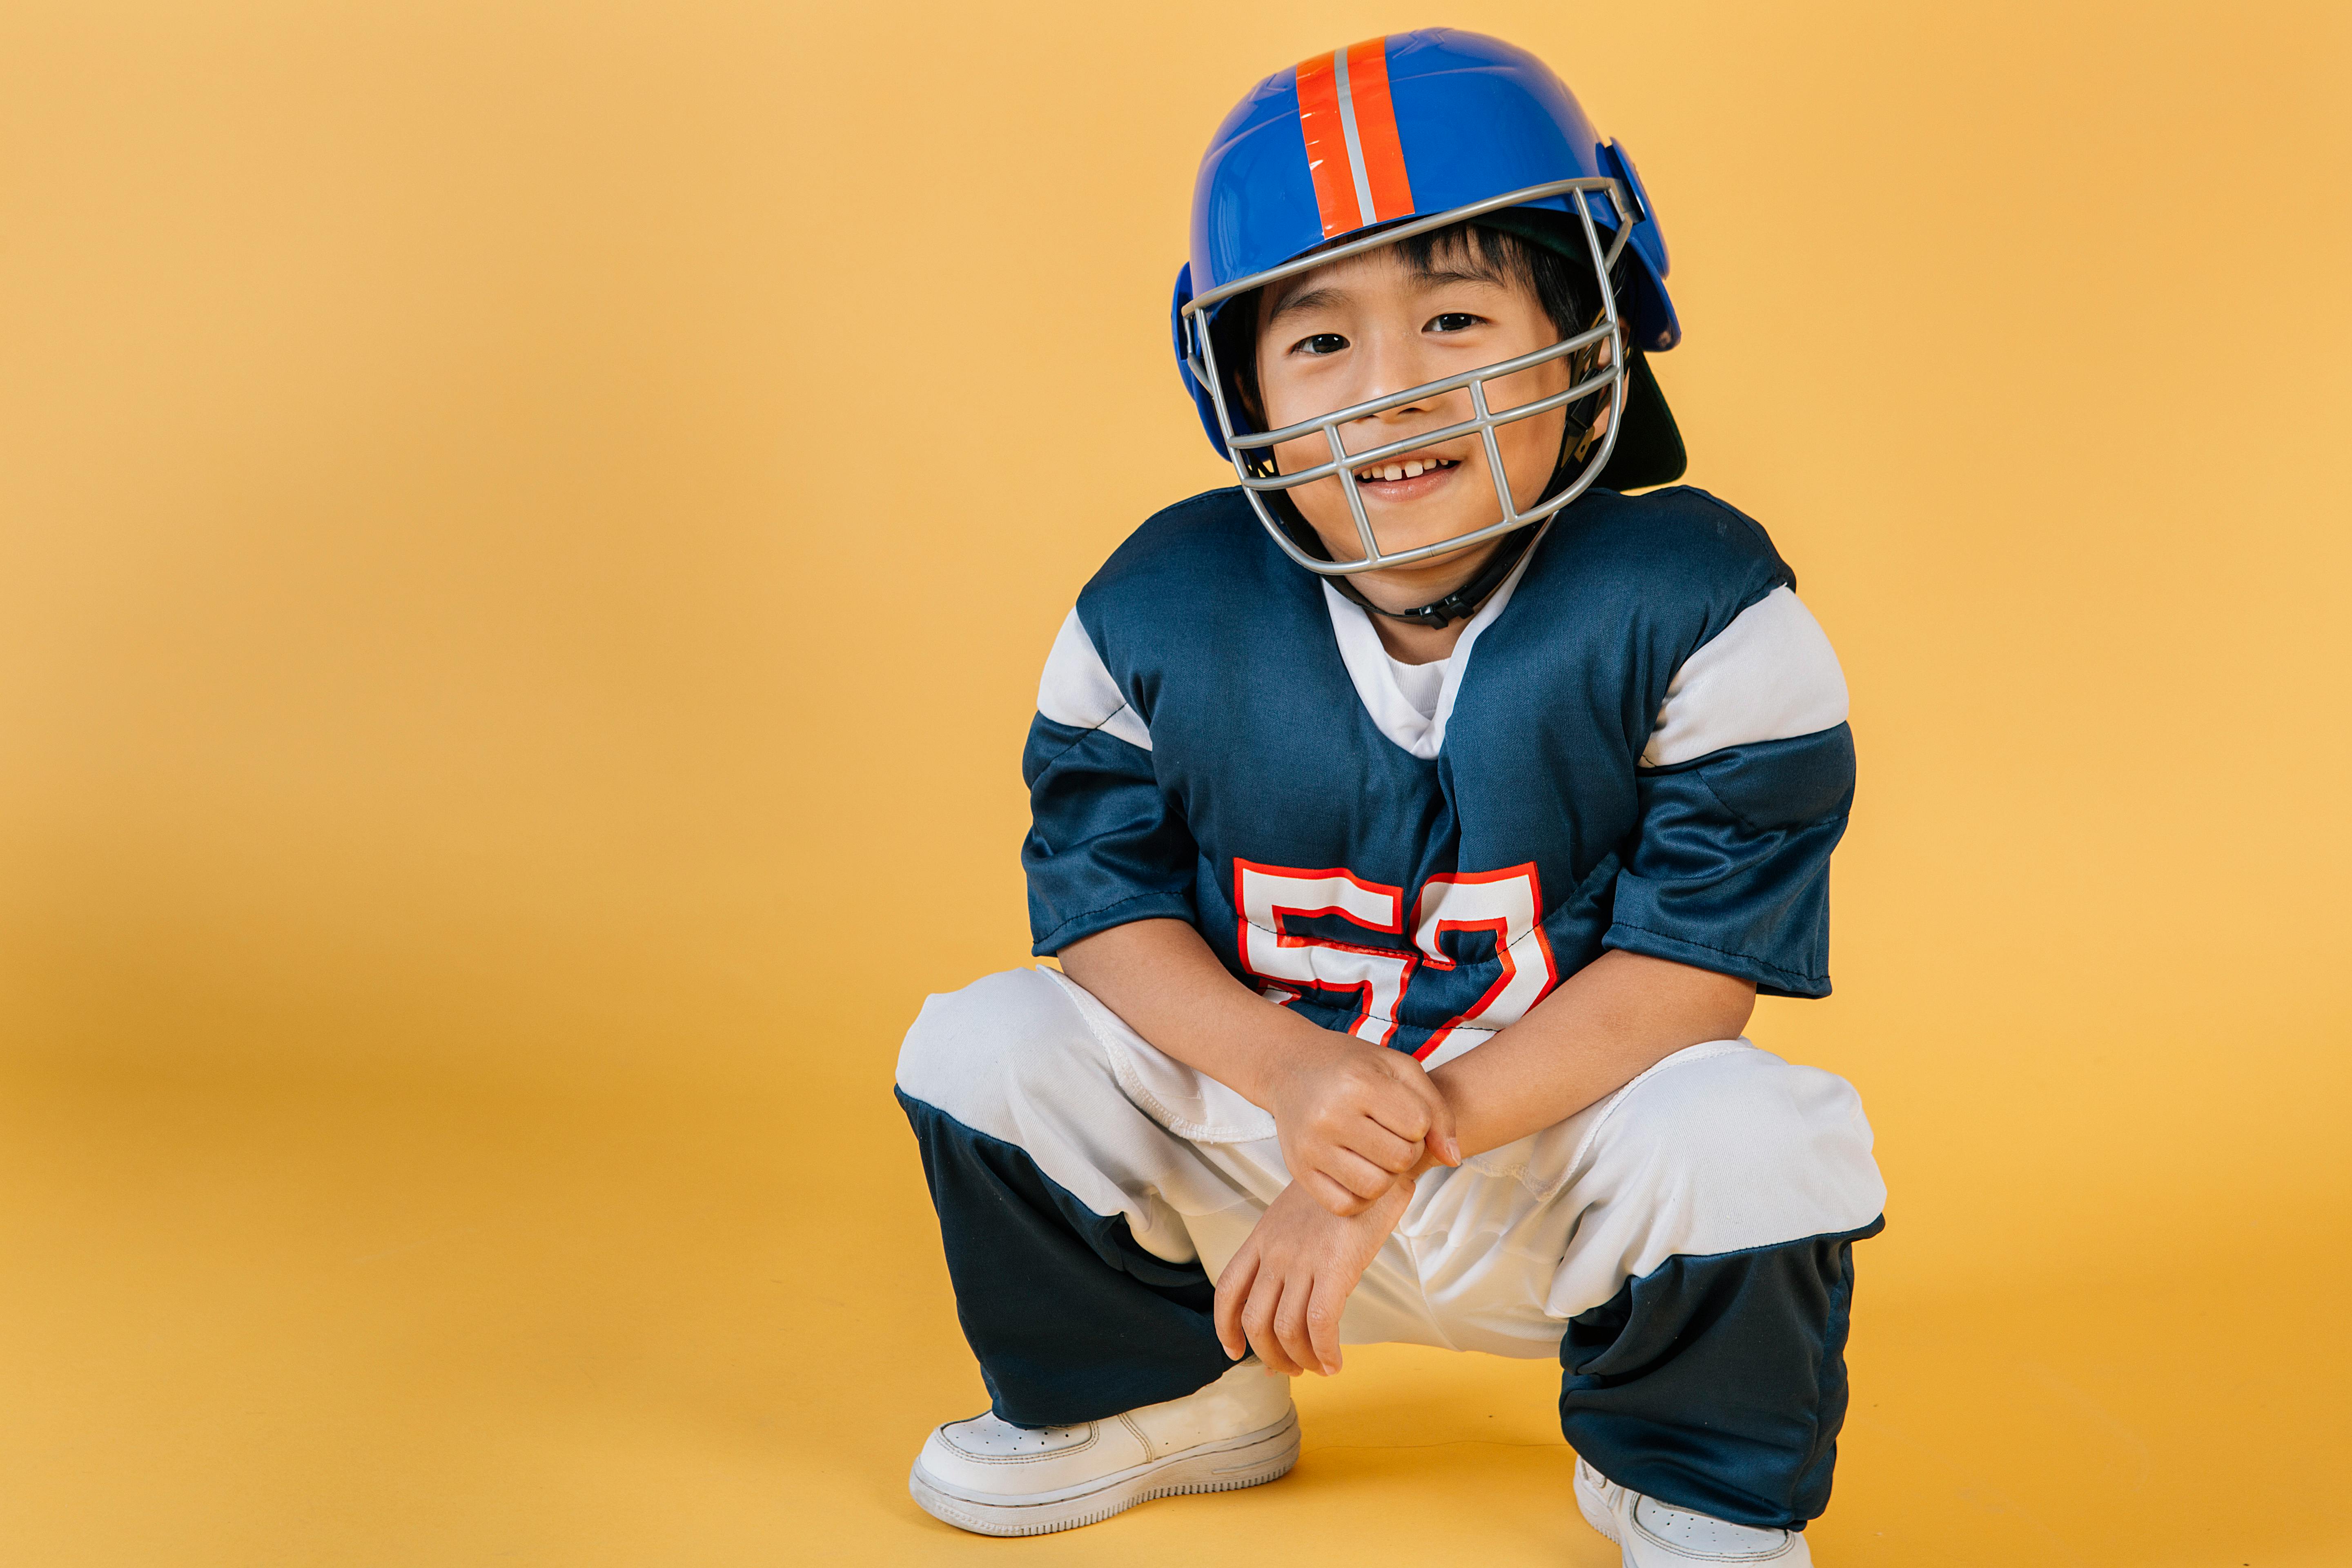 smiling ethnic boy in helmet and uniform of football player